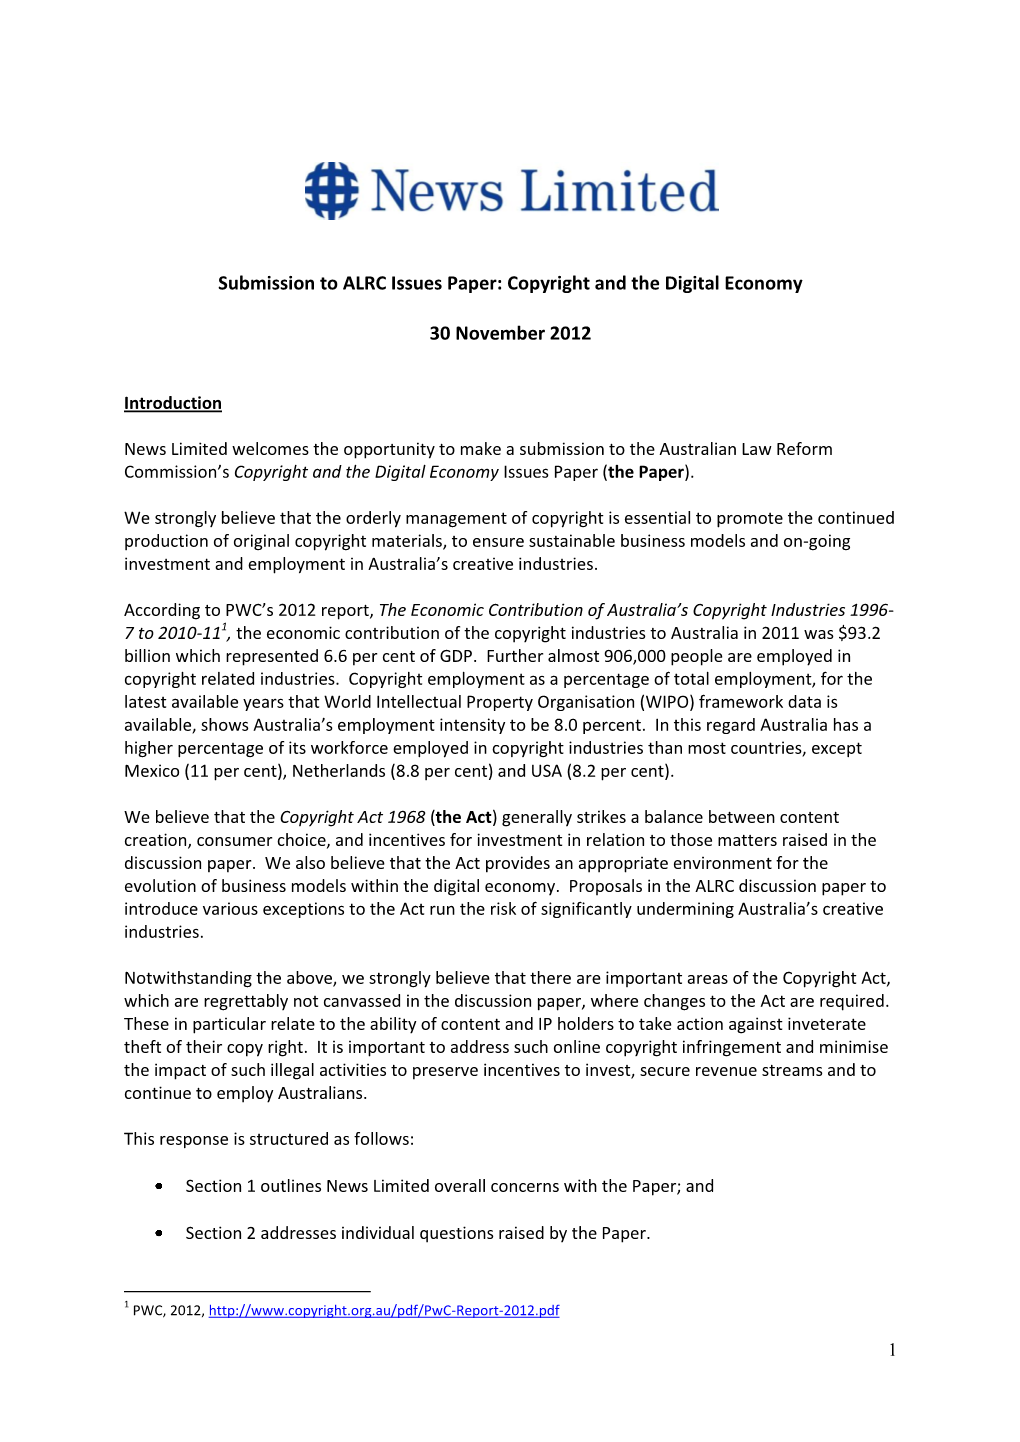 Submission to ALRC Issues Paper: Copyright and the Digital Economy